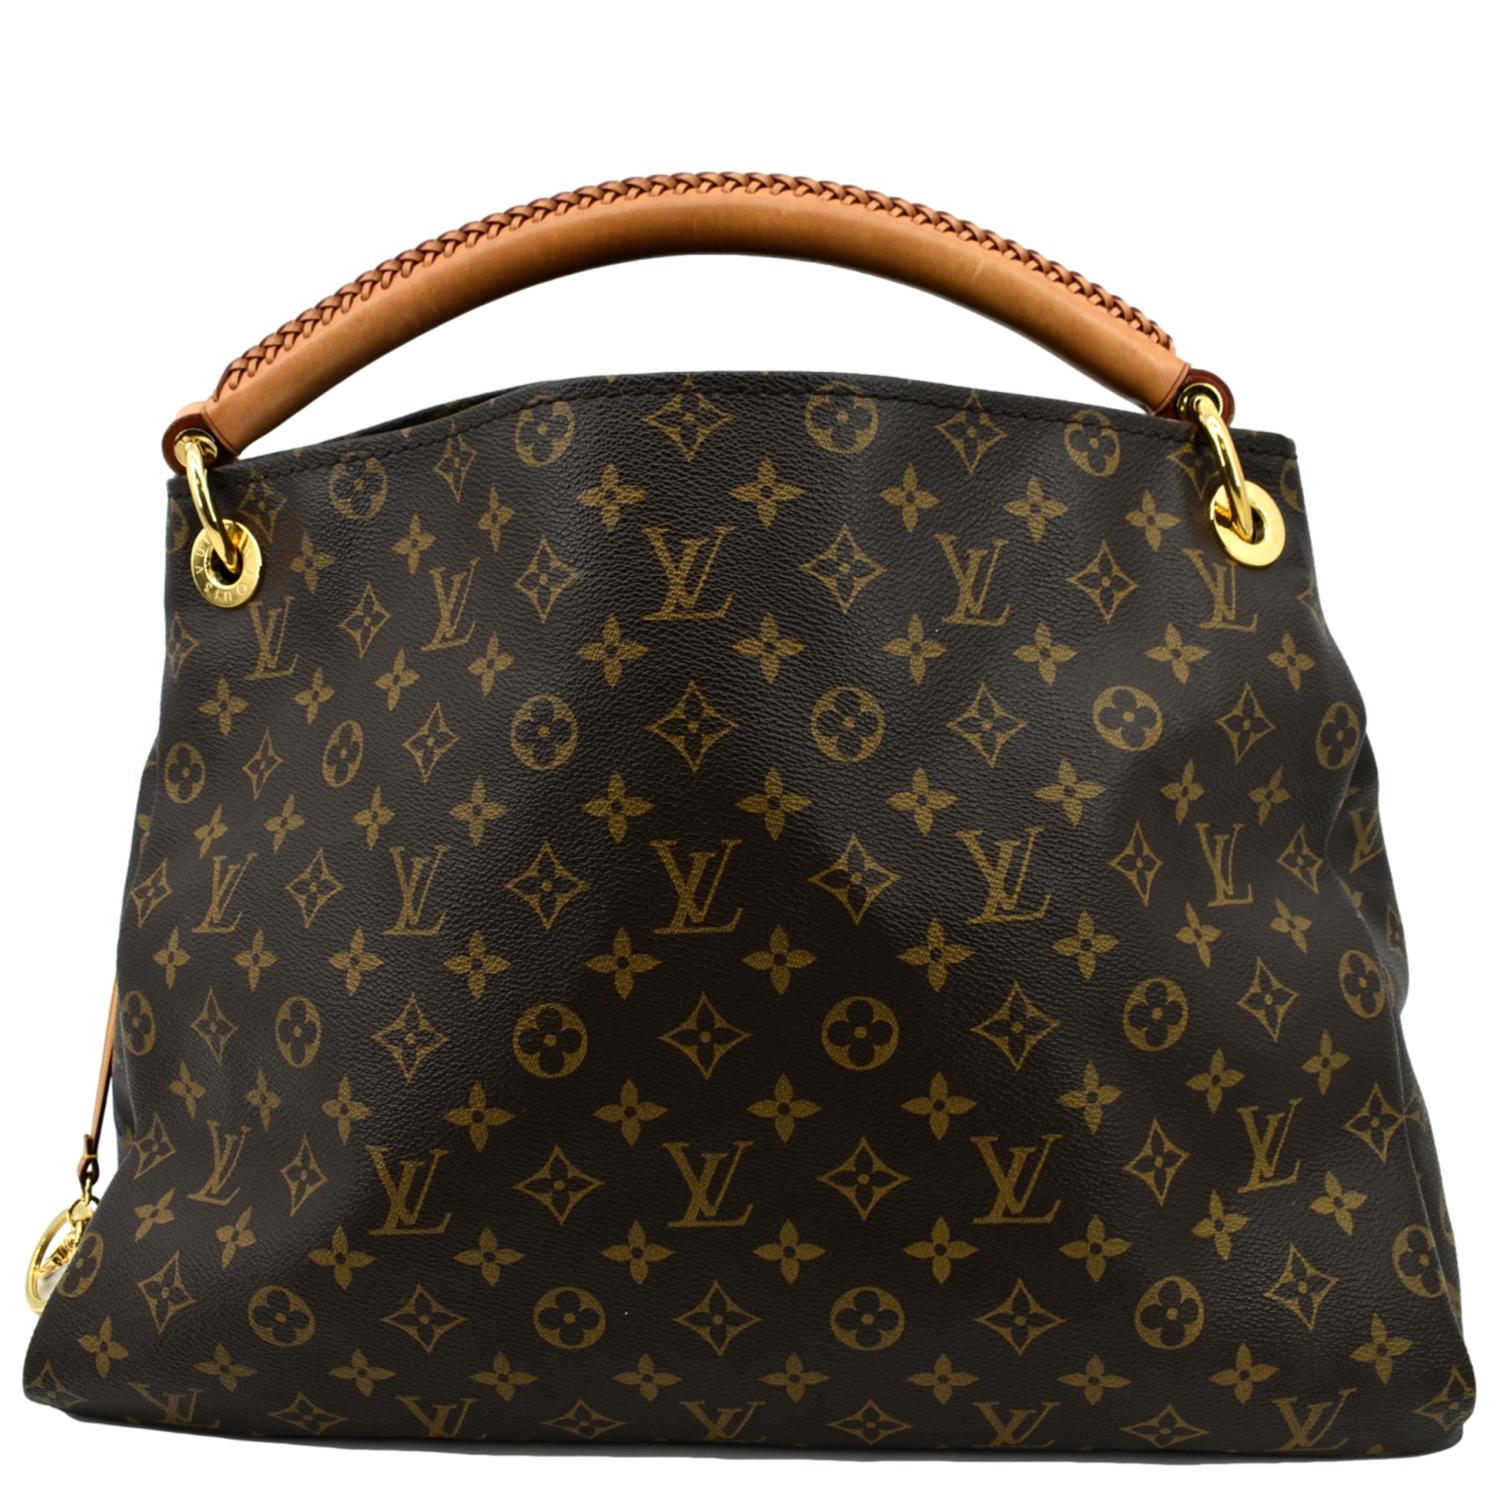 Louis Vuitton bags, Gallery posted by IG.abcx131419